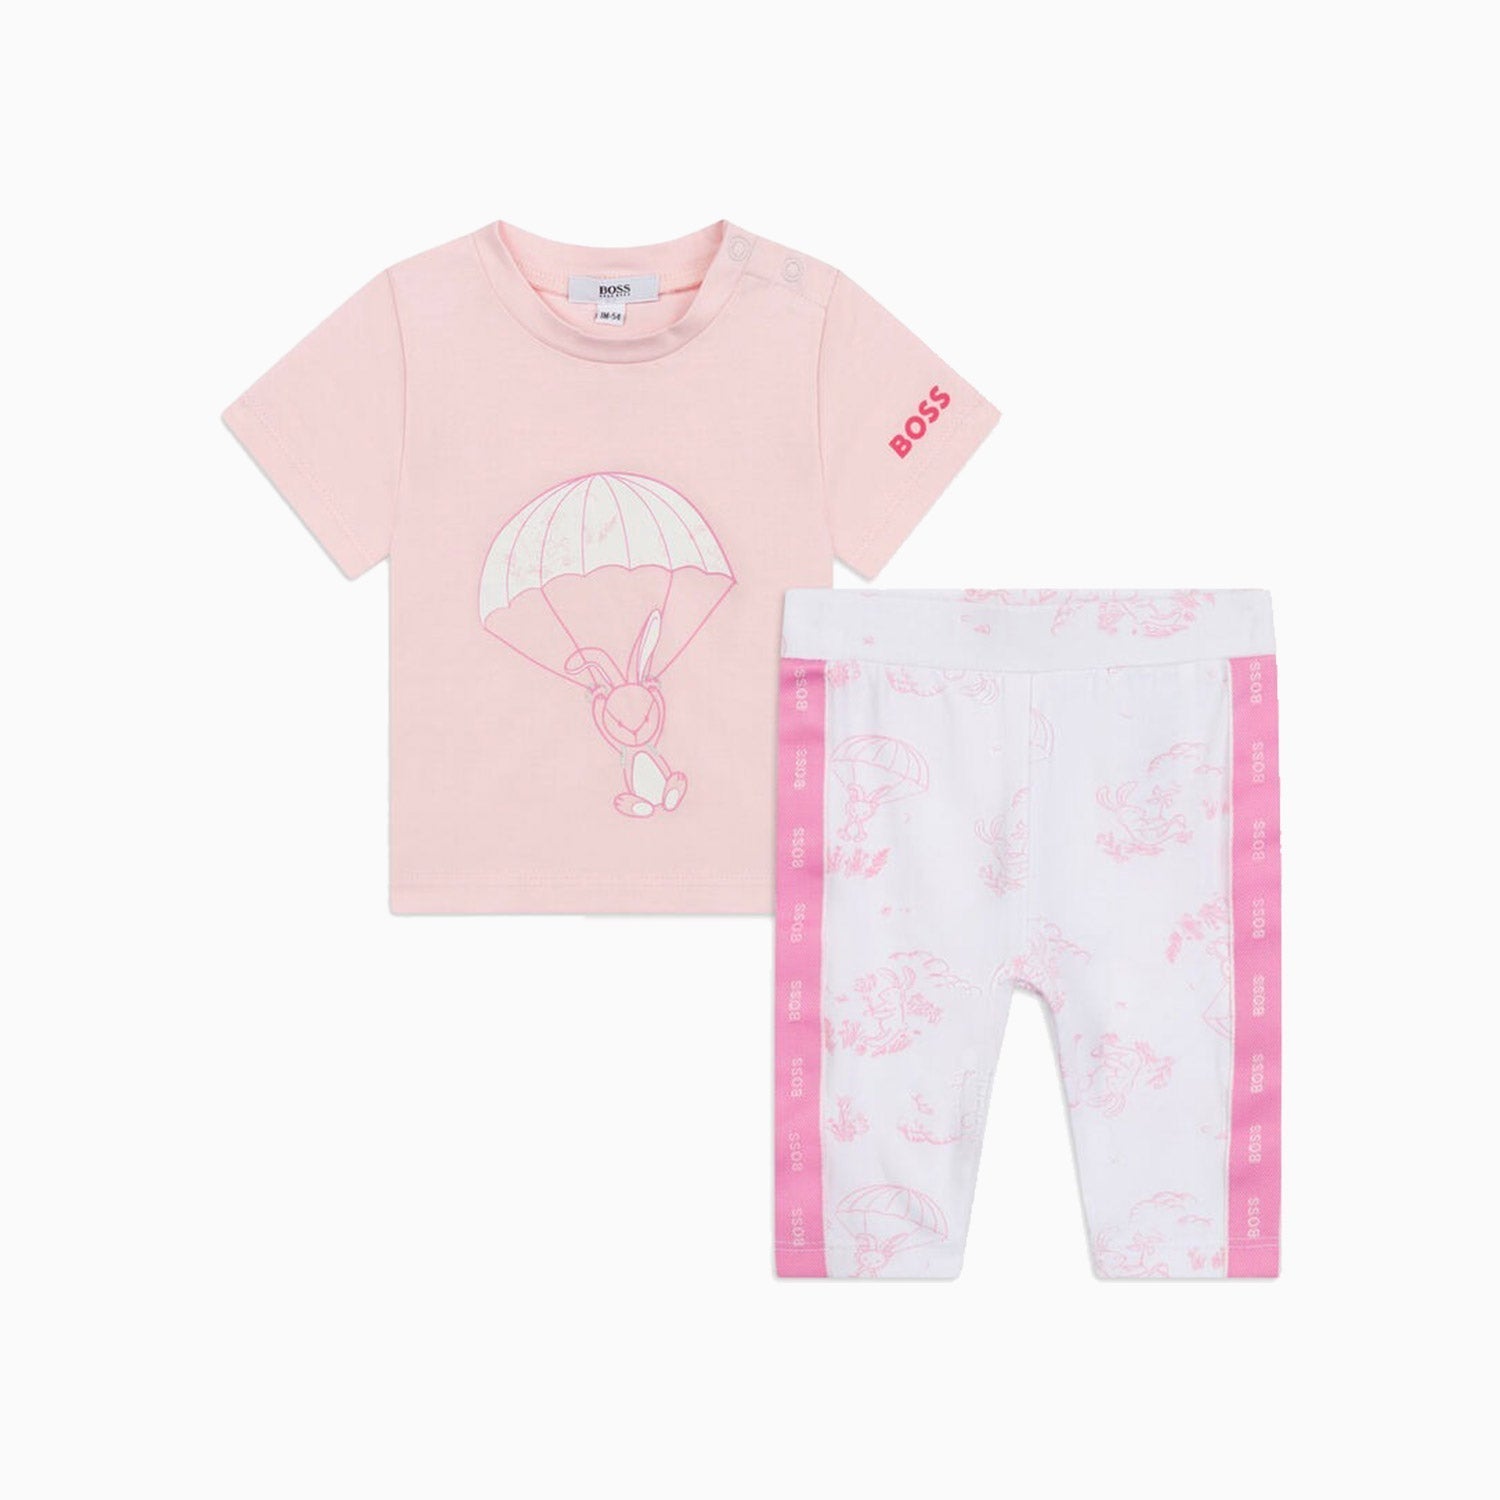 Hugo Boss Kid's T Shirt And Leggings Outfit - Color: Pink Pale - Kids Premium Clothing -